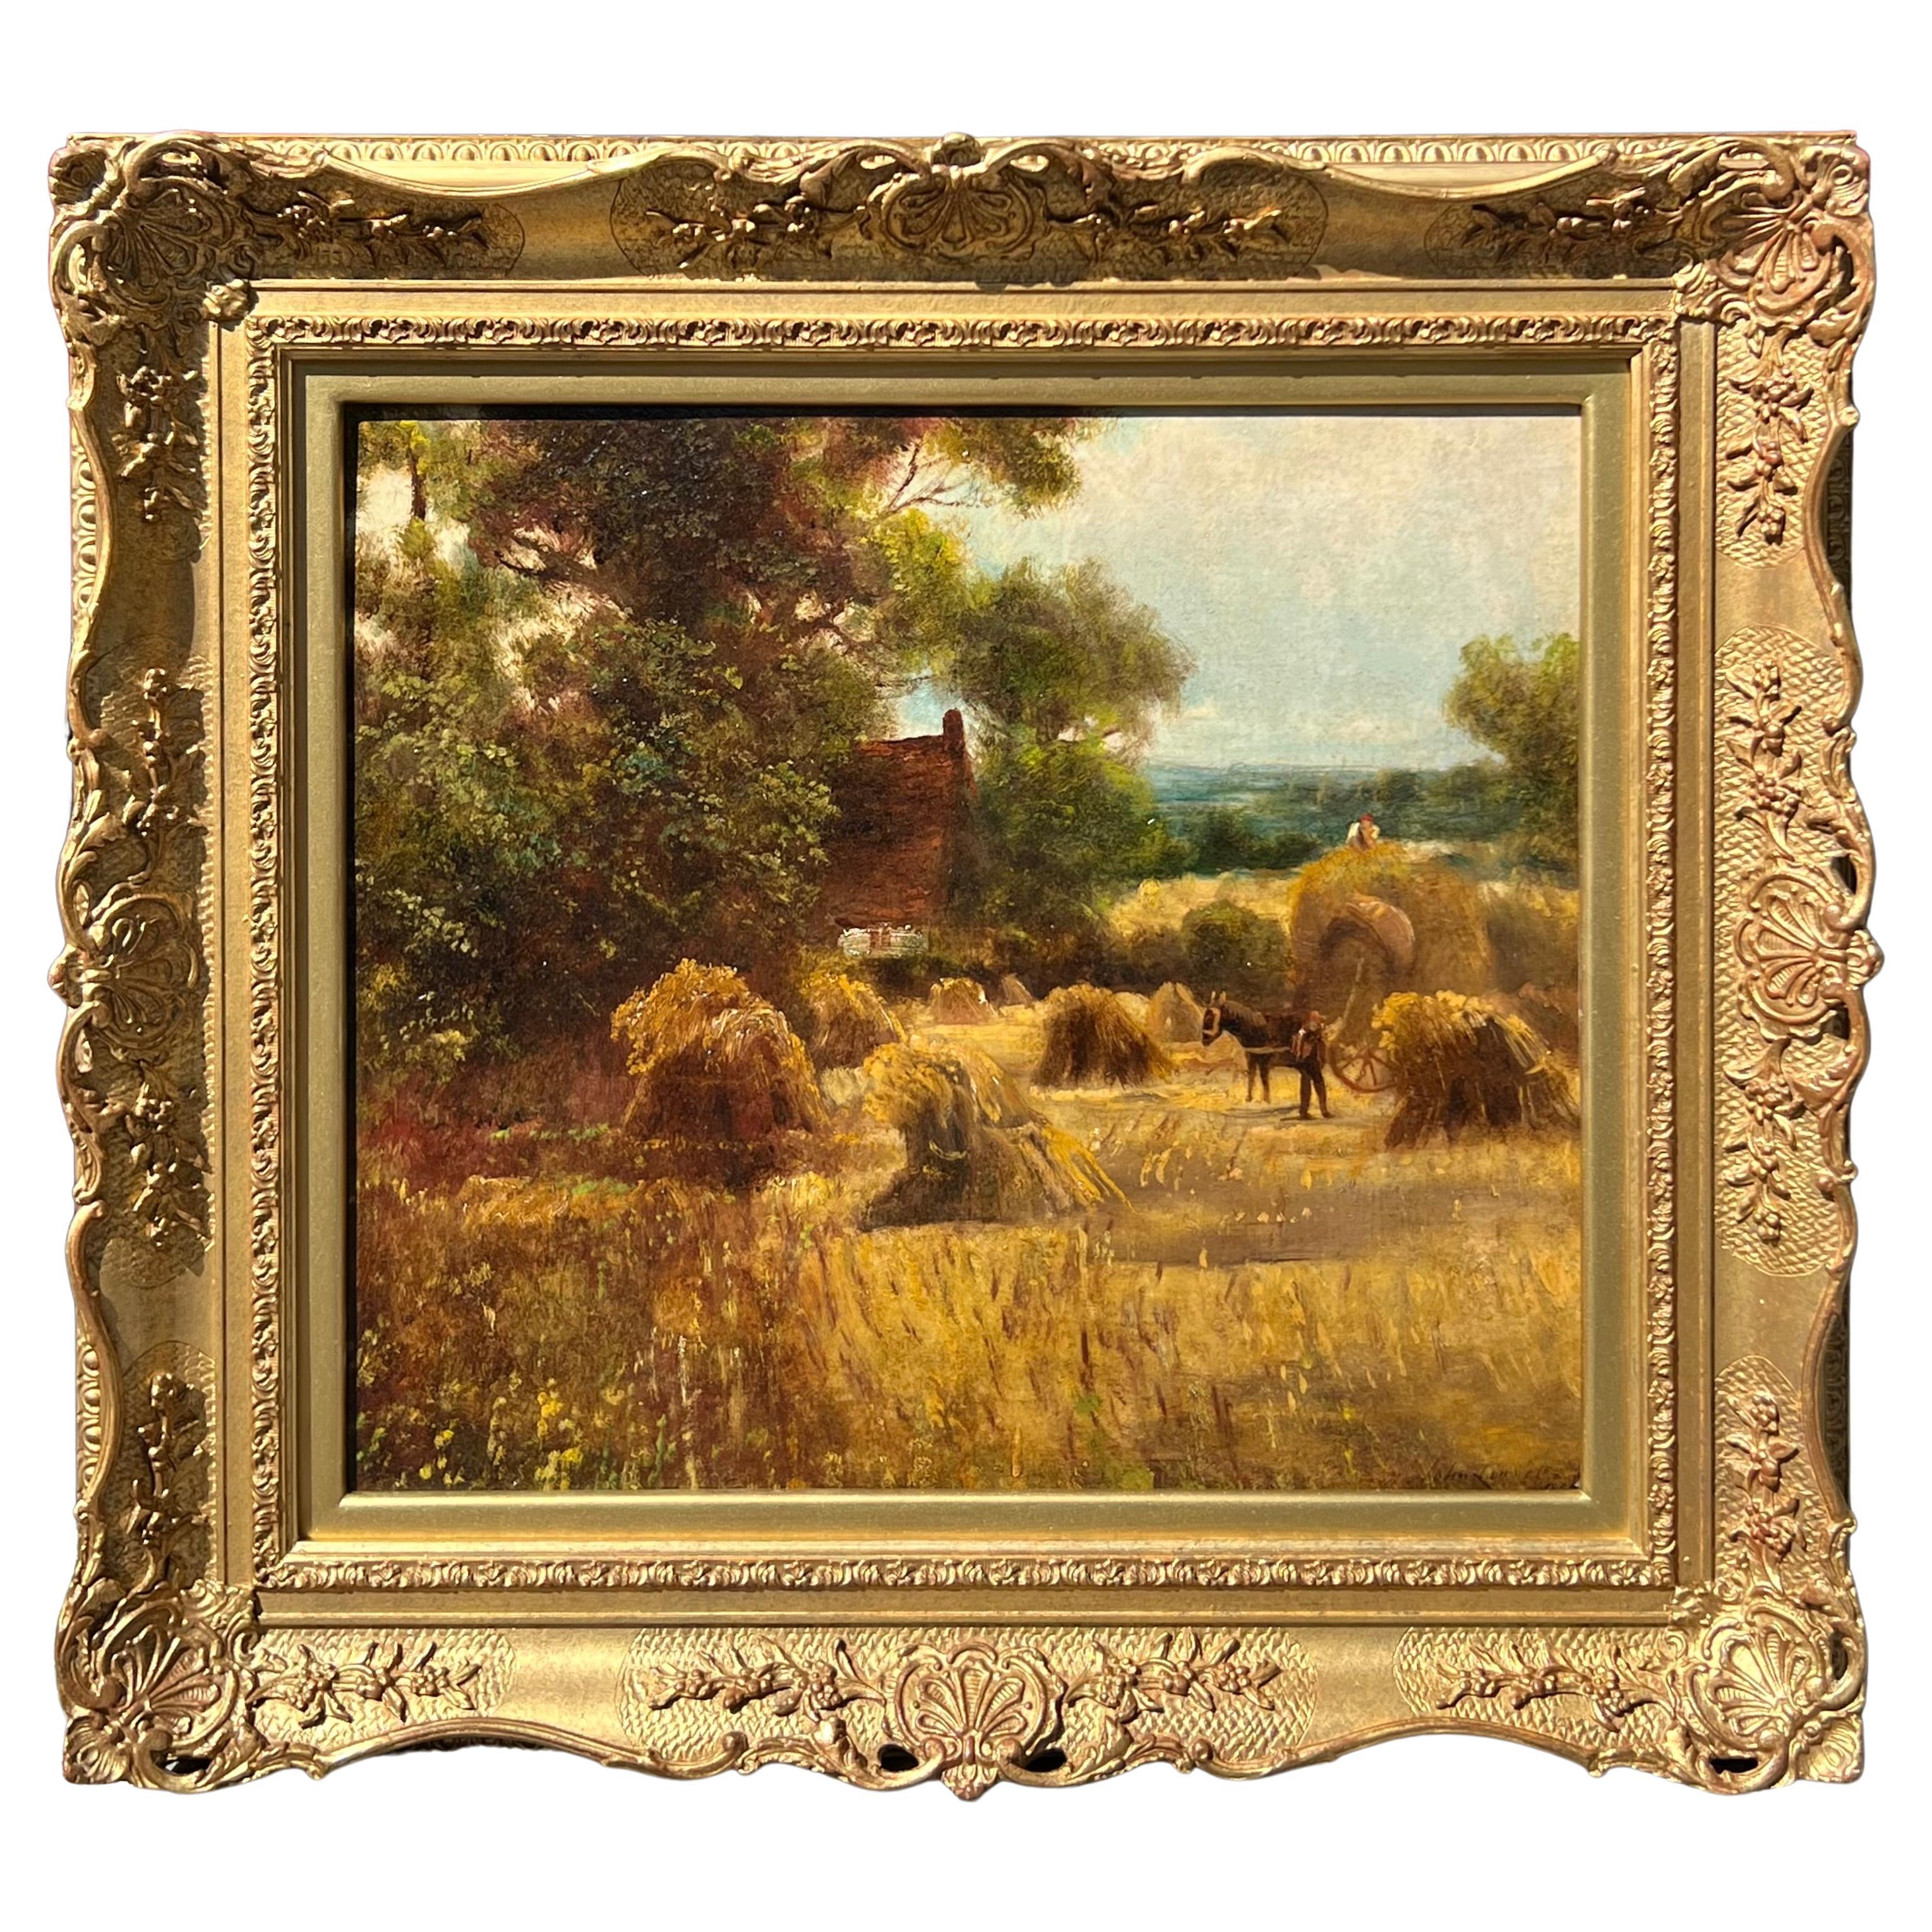 "Baling the Hay" by John Linnell For Sale